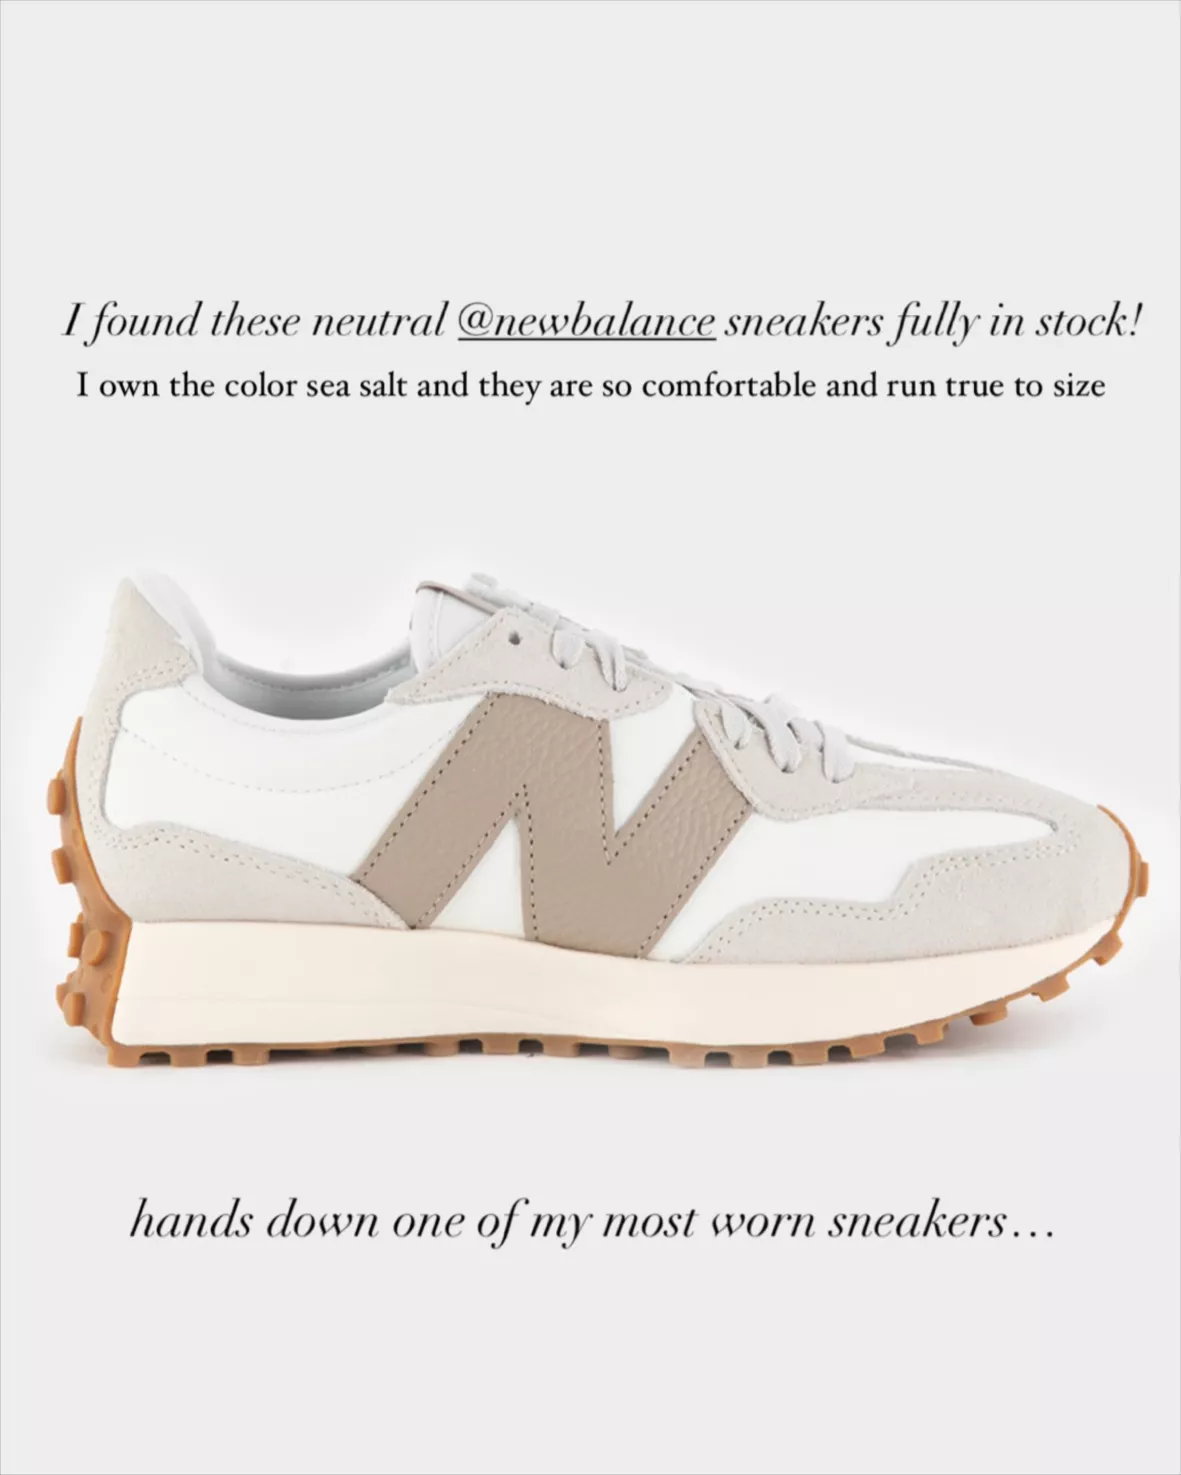 New Balance 327 sneakers in white & tan